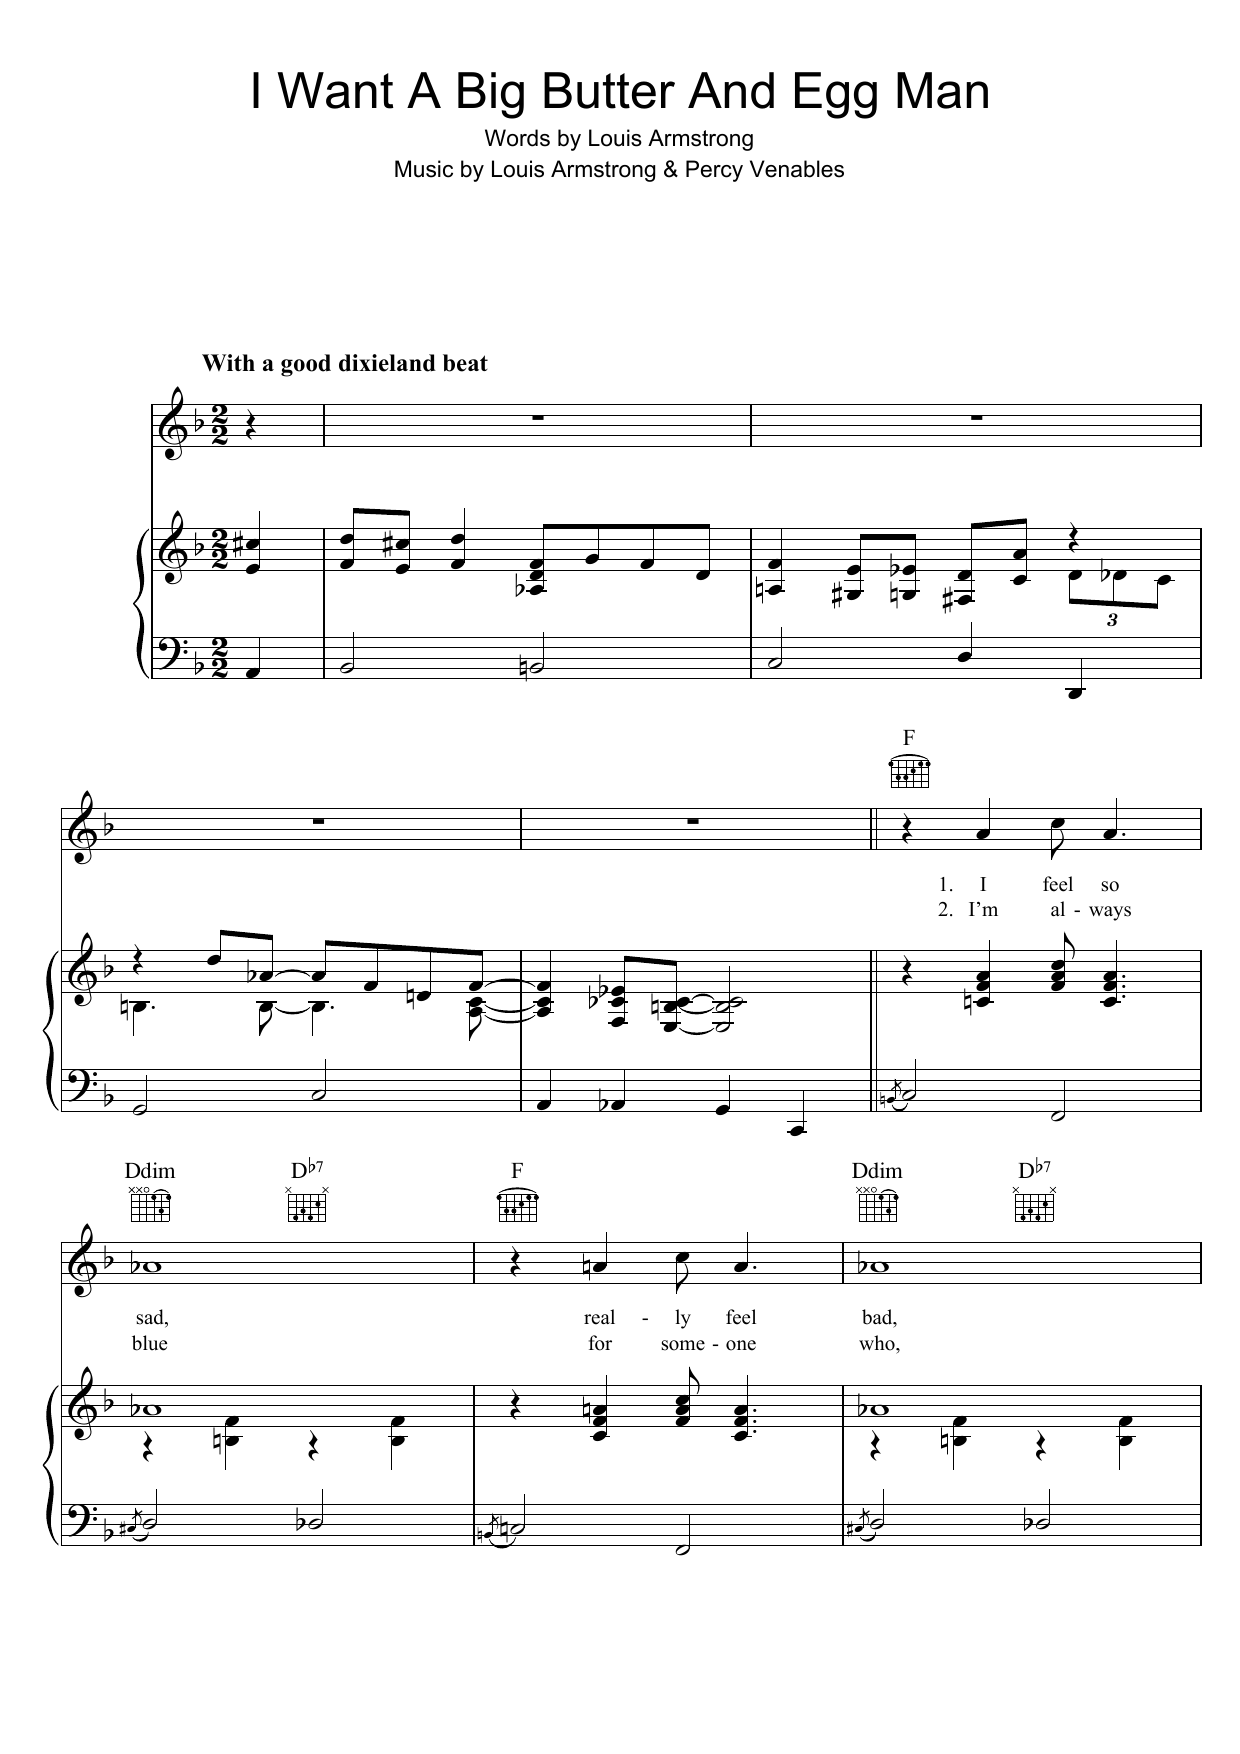 Louis Armstrong I Want A Big Butter And Egg Man sheet music notes and chords. Download Printable PDF.